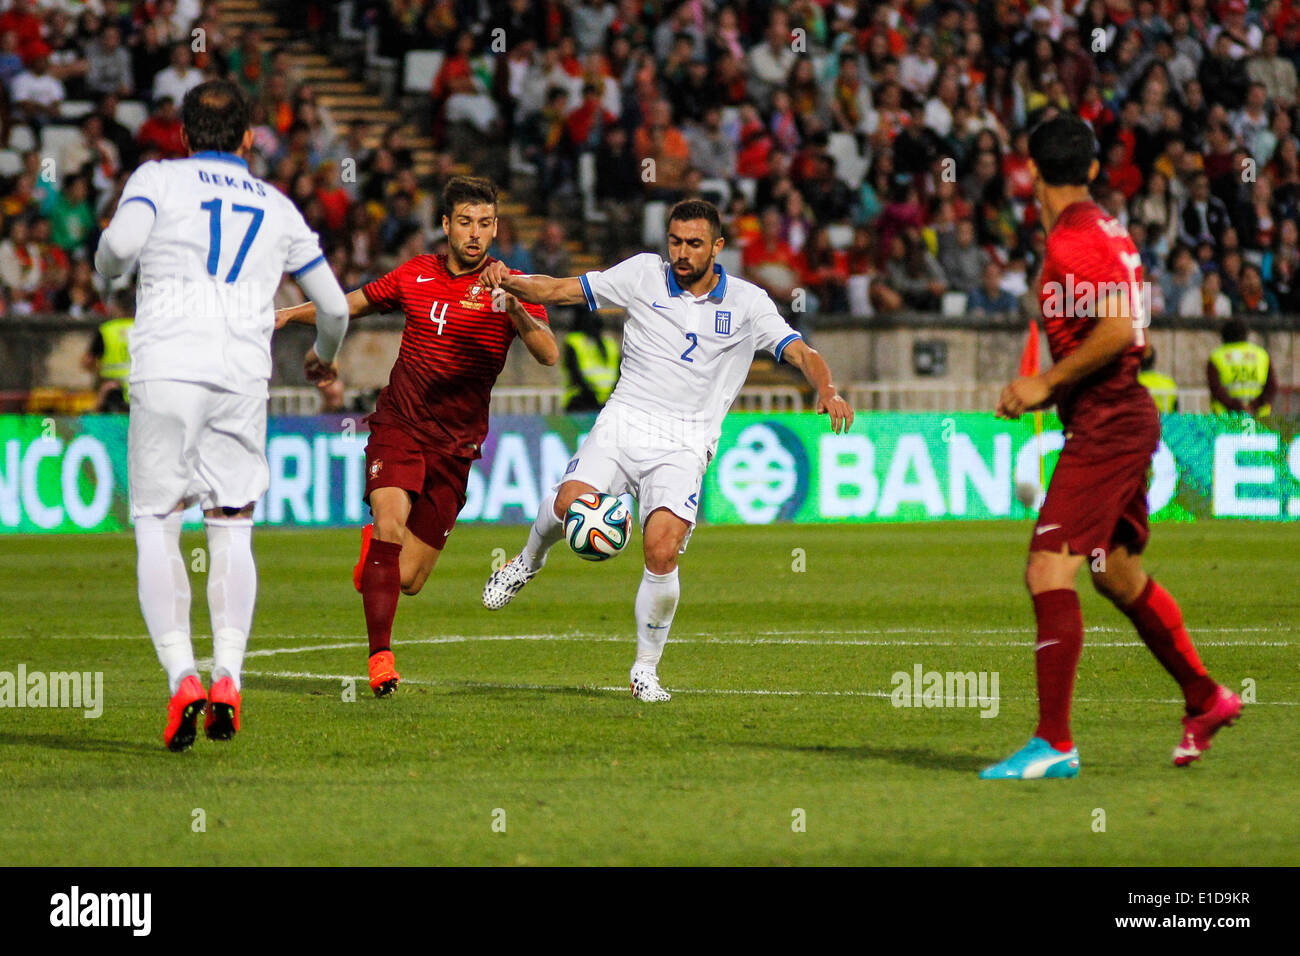 Lisbon, Porrtugal. 31st May, 2014. Portugal midfielder Miguel Veloso (4) and Greece defender Giannis Maniatis (2) vies for the ball during preparatory friendly match for the World Cup at the National Stadium in Lisbon, Portugal, Saturday, May 31, 2014. Credit:  Leonardo Mota/Alamy Live News Stock Photo